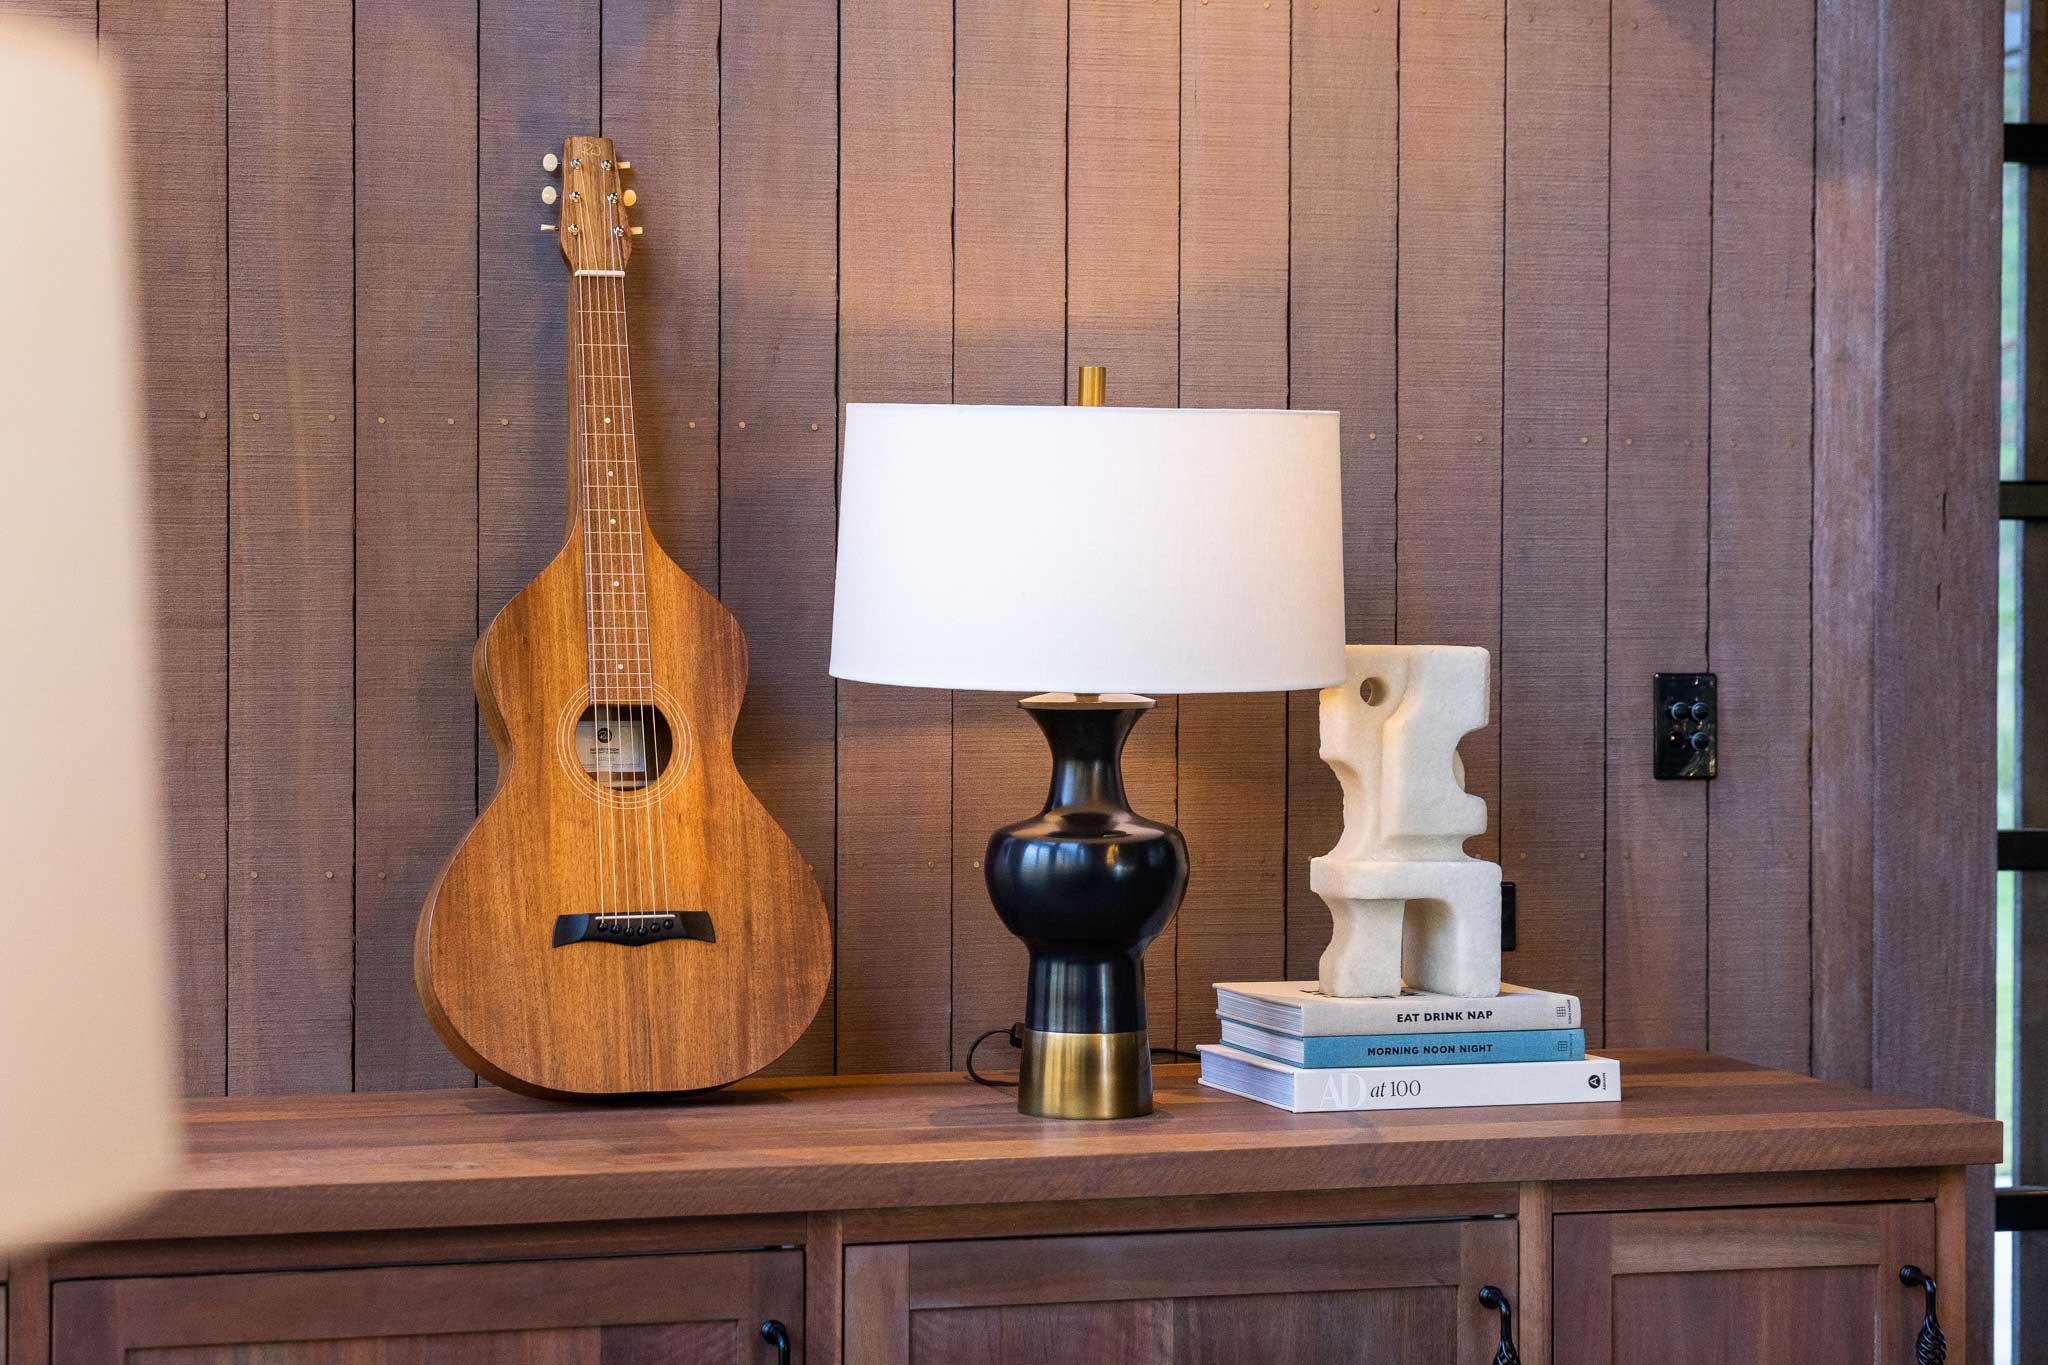 Style 1 Weissenborn Lap Steel Slide Guitar styled in modern country home on shelf used as art without a stand